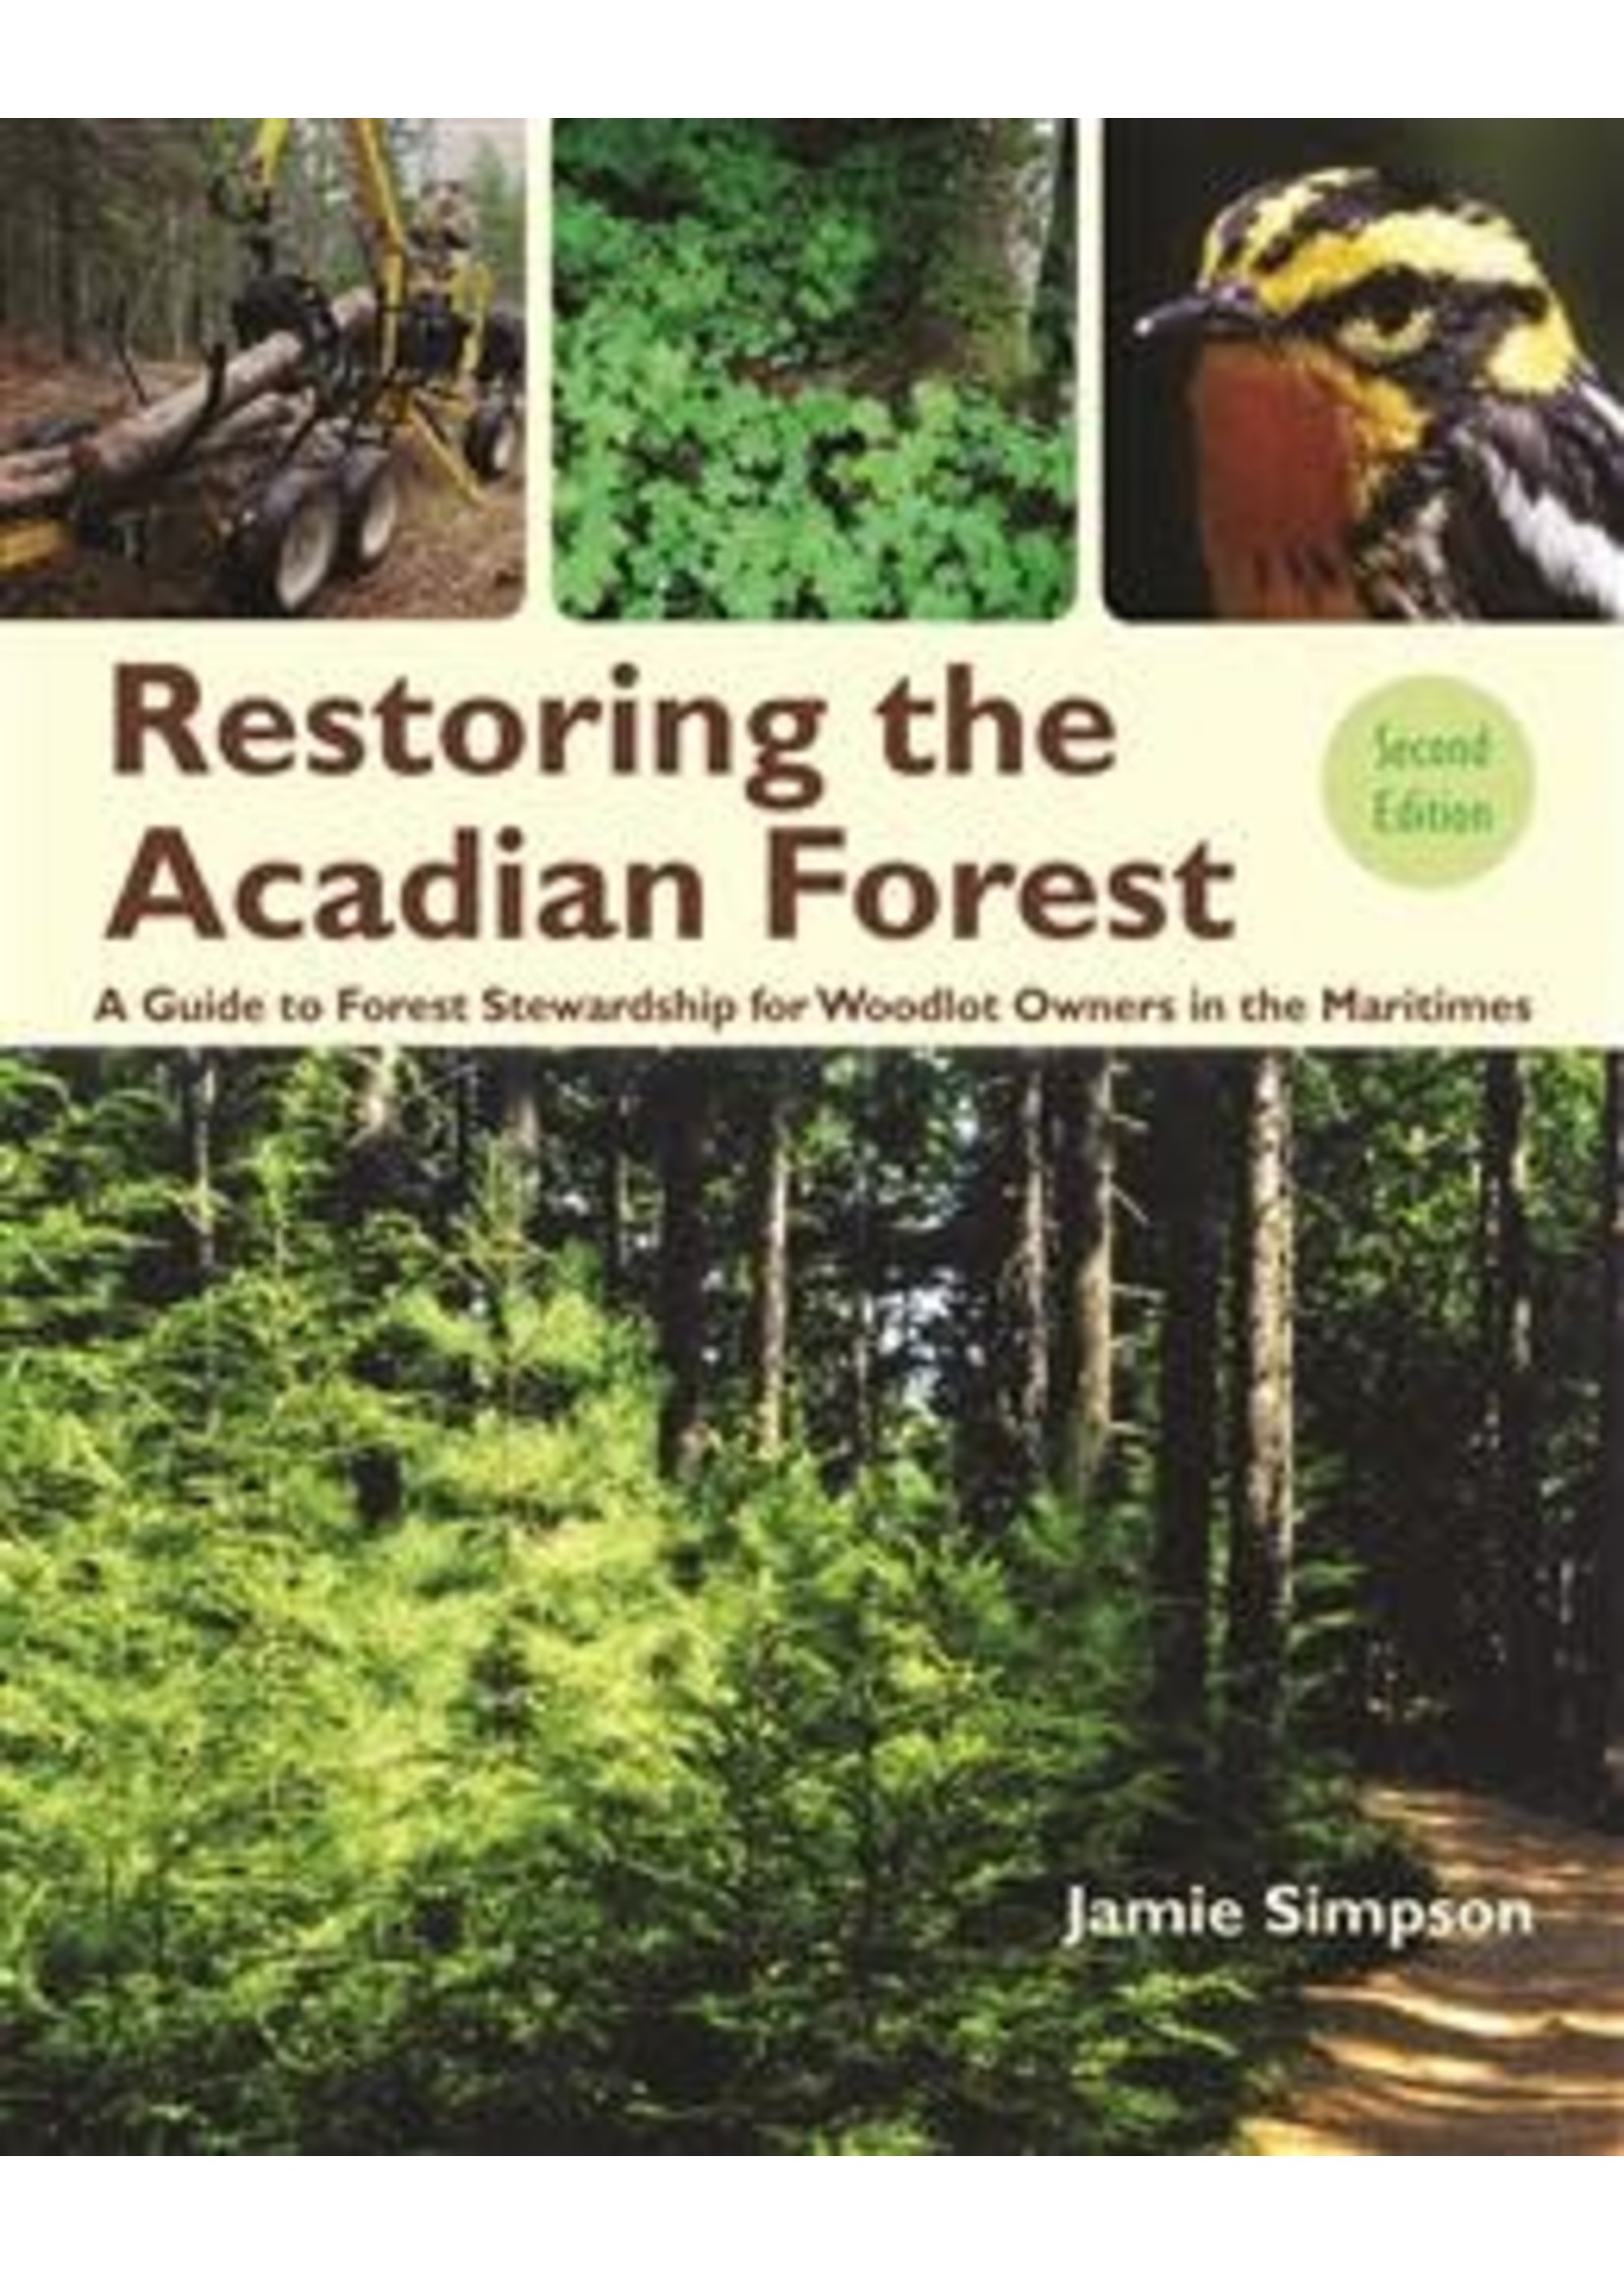 Restoring the Acadian Forest 2nd ed: A Guide to Forest Stewardship for Woodlot Owners in Eastern Canada by Jamie Simpson